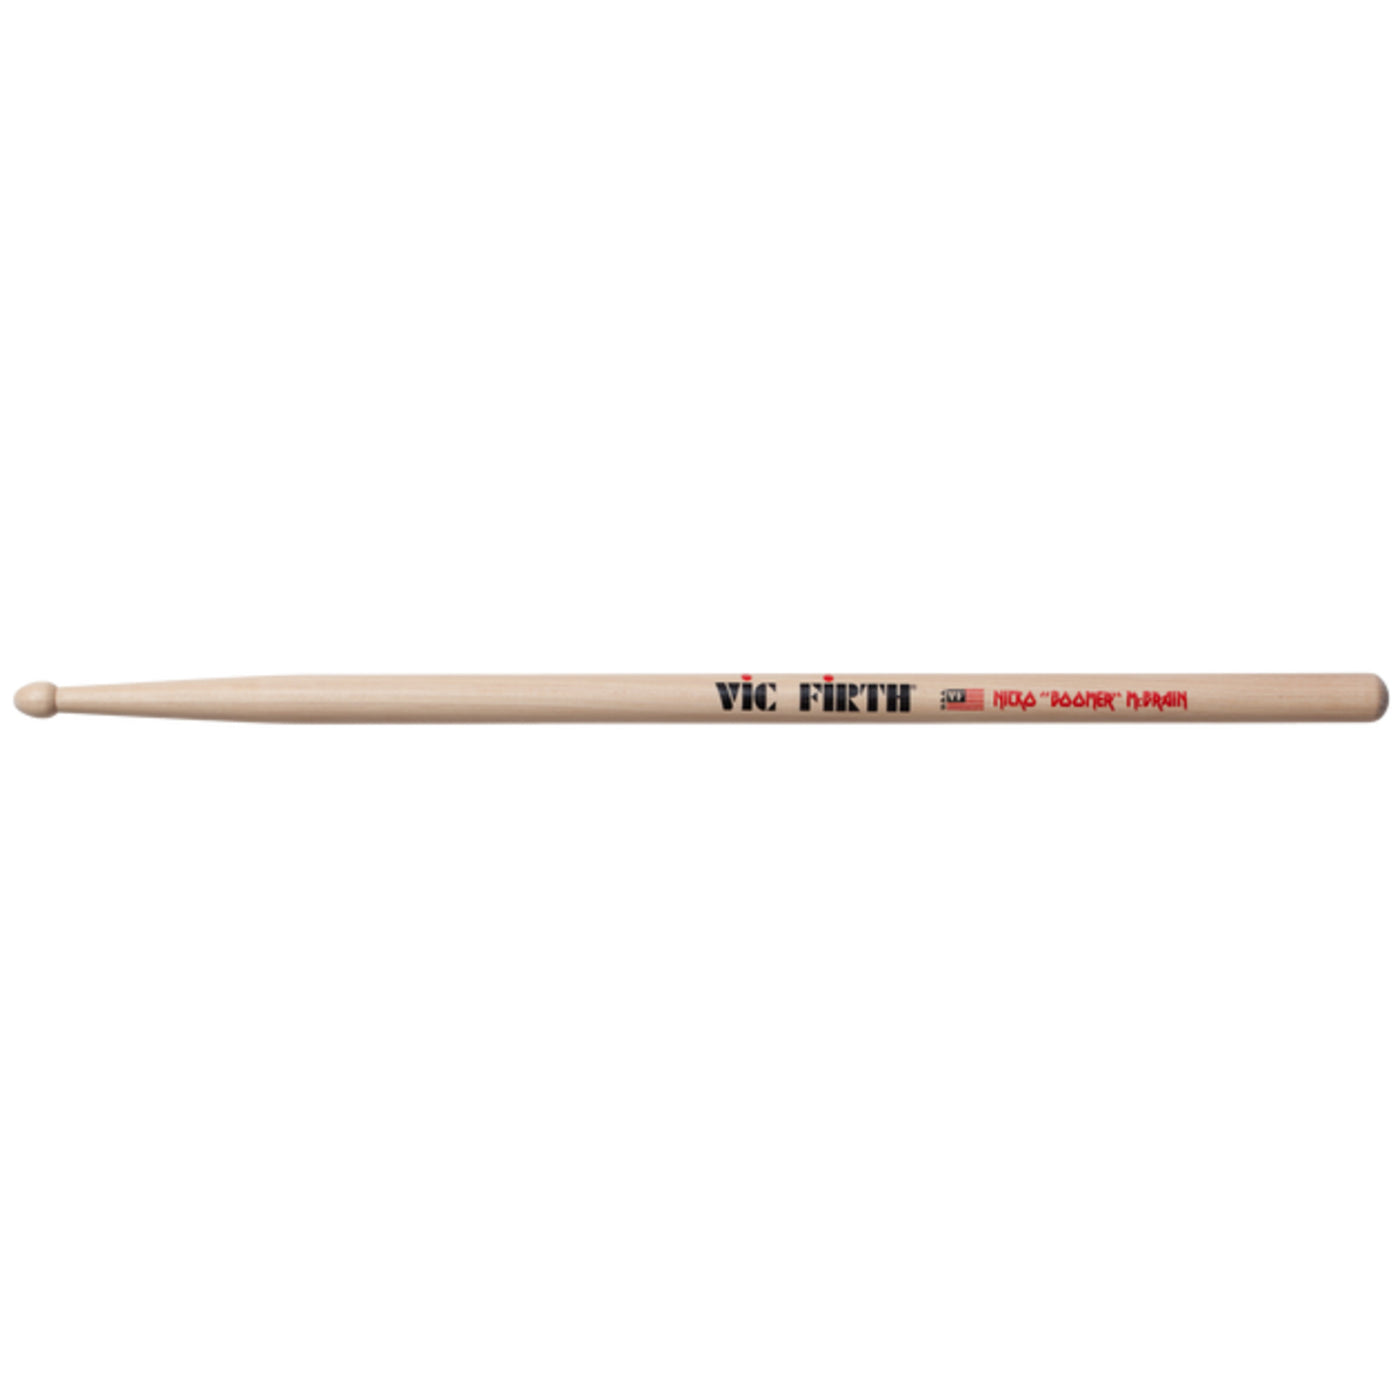 Vic Firth Signature Series - Nicko Mcbrain Drumstick (SNM)